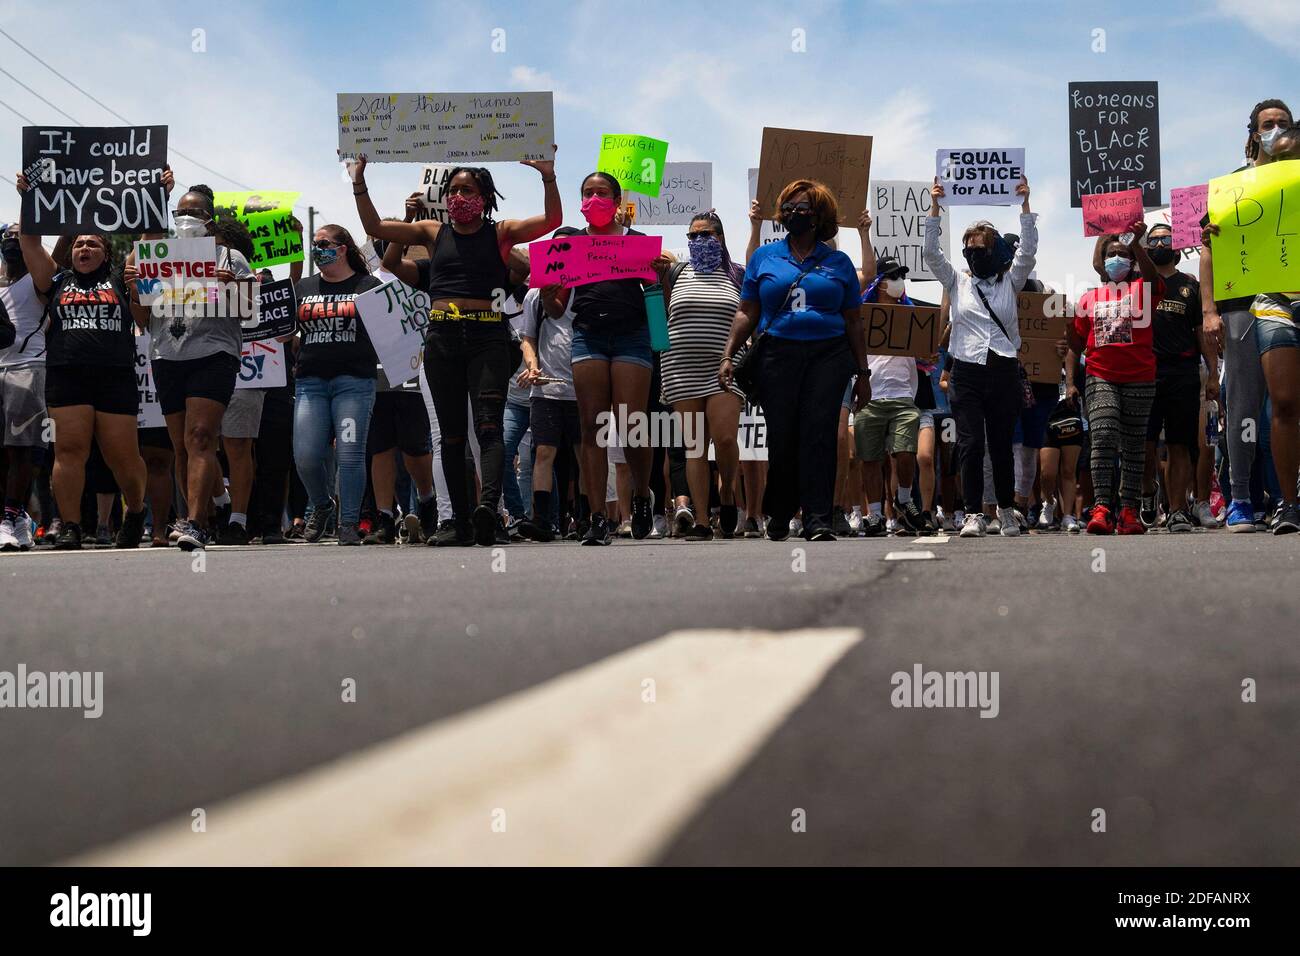 NO FILM, NO VIDEO, NO TV, NO DOCUMENTARY - Demonstrators make their way down Satellite Boulevard during a protest billed as 'Justice for Black Lives,' originating at Gwinnett Place Mall, Sunday, June 7, 2020, in Duluth, Ga. Protesters were demonstrating against the death of George Floyd. They called for, among other things, the passing of a hate crimes bill, repeal of citizens arrest law, and police reform. Photo by John Amis/Atlanta Journal-Constitution/TNS/ABACAPRESS.COM Stock Photo